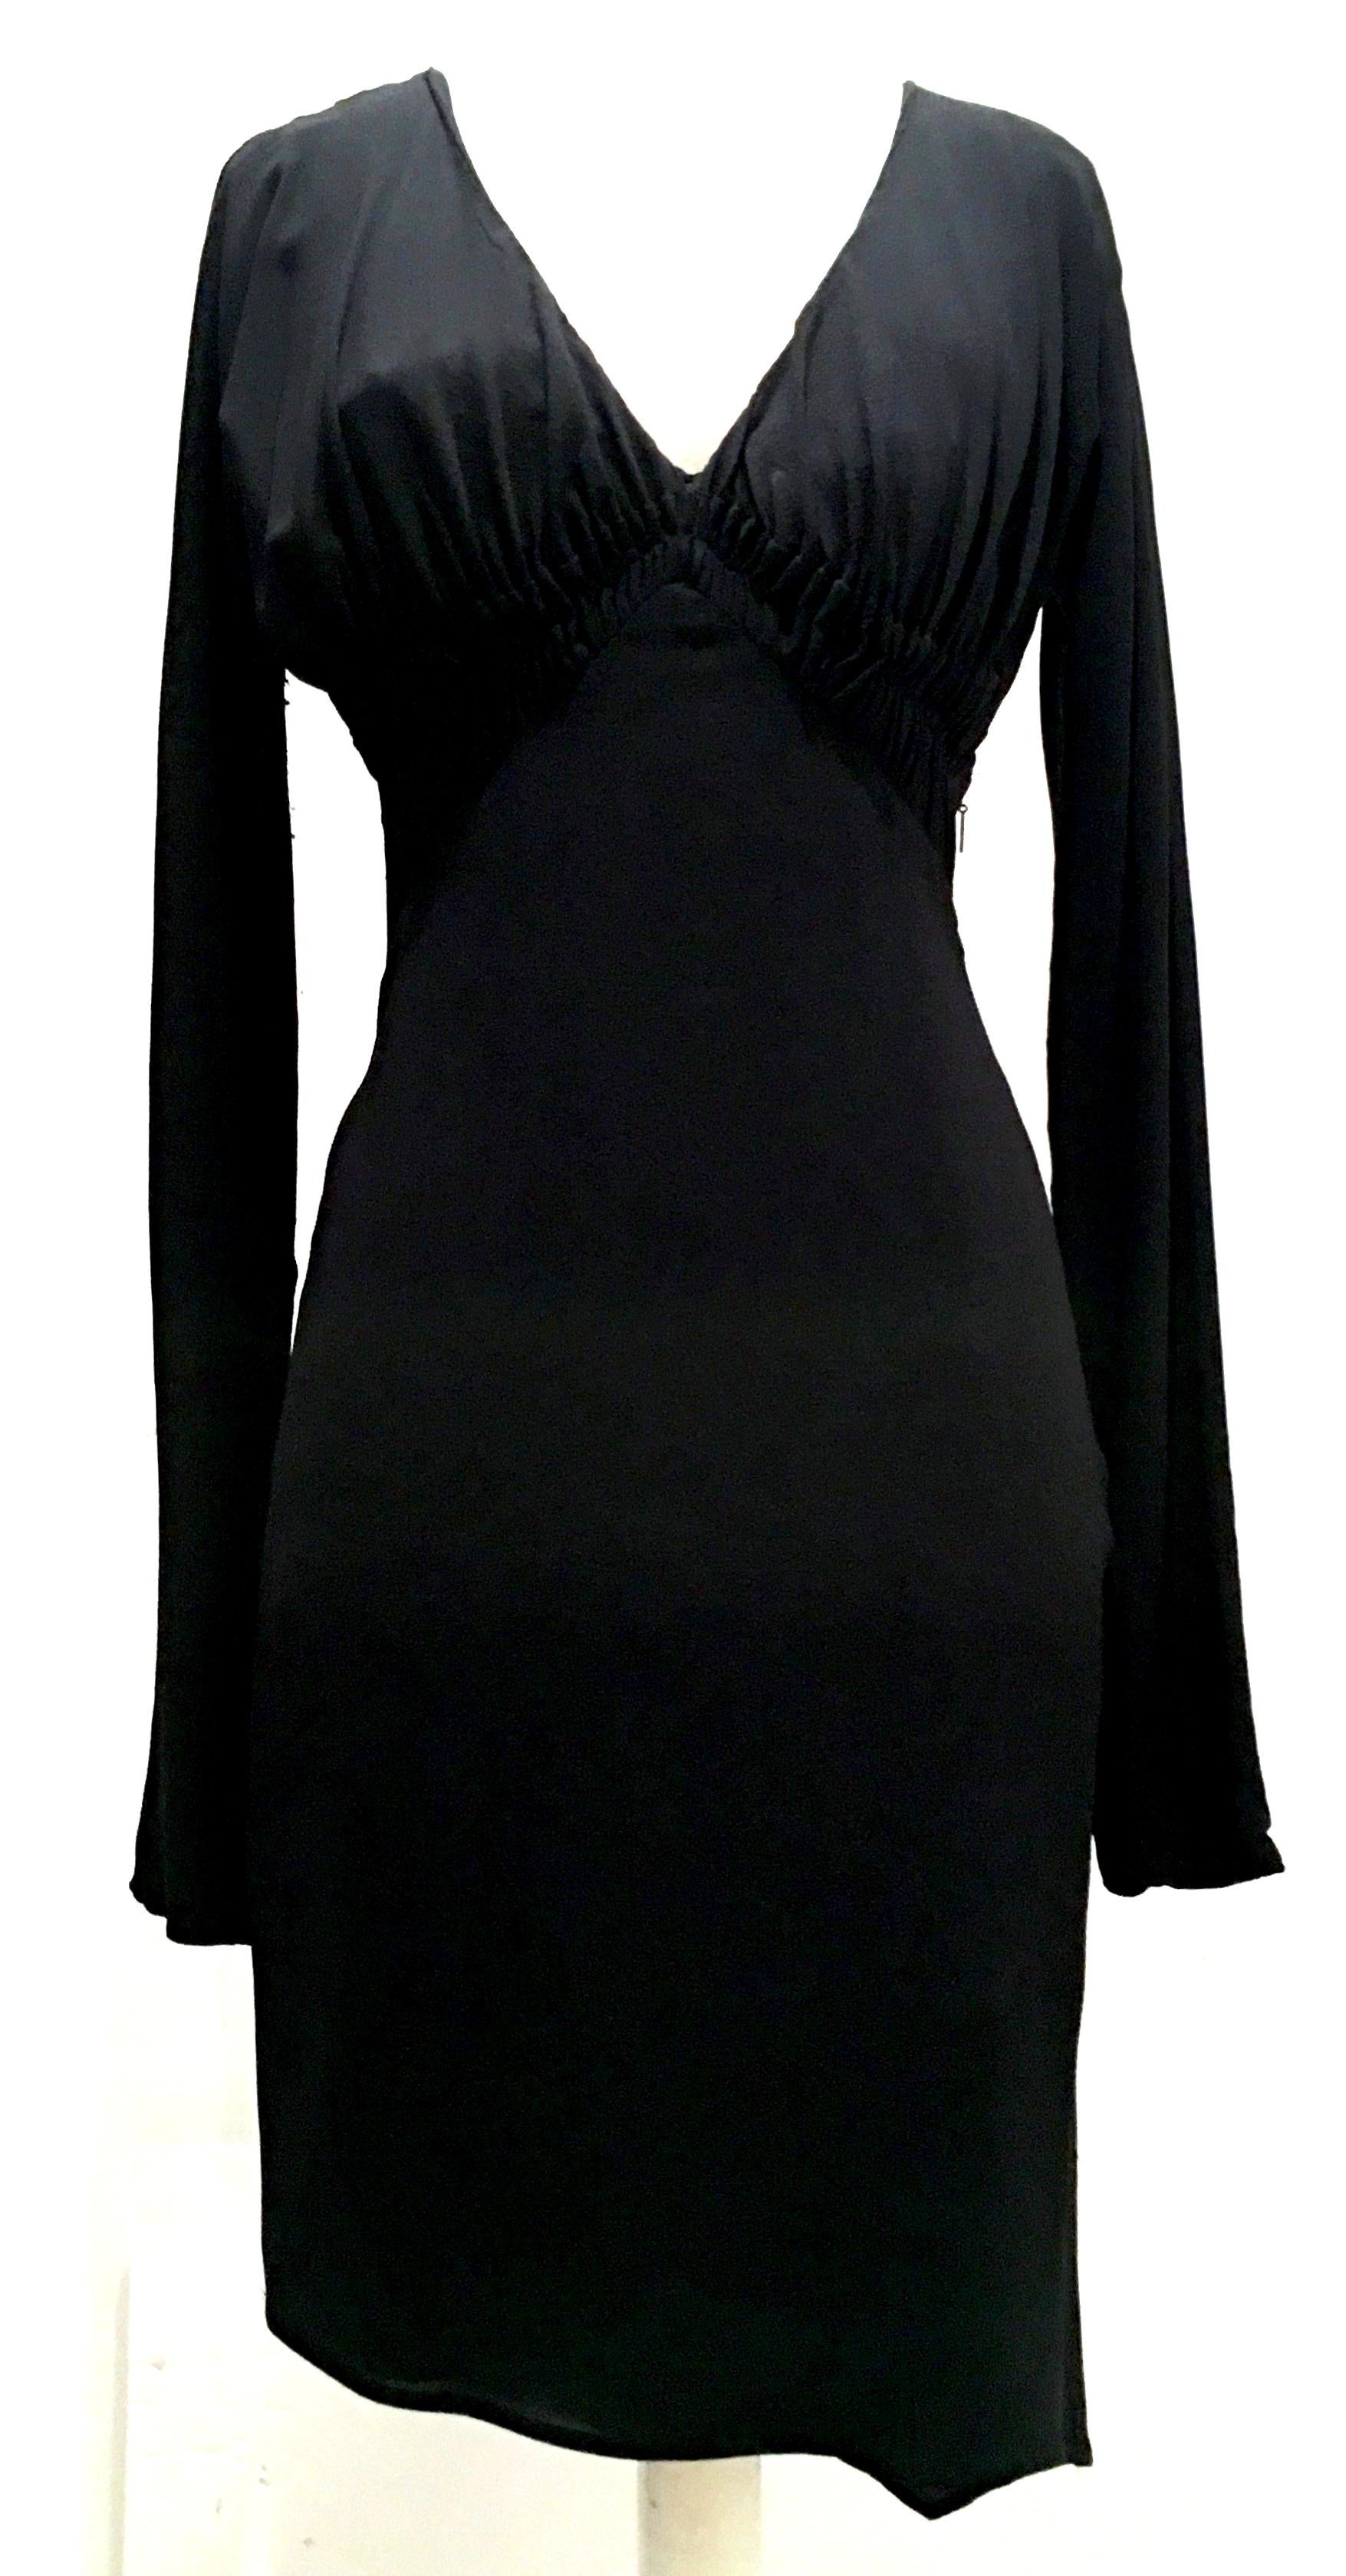 2003 Italian silk long sleeve deep plunge form fitting little black dress by, Tom Ford For Gucci-size 42. This form fitting fully lined dress featured a deep plunge neck with empire rouche detail, and asymmetrical hem. The black Gucci logo zipper is